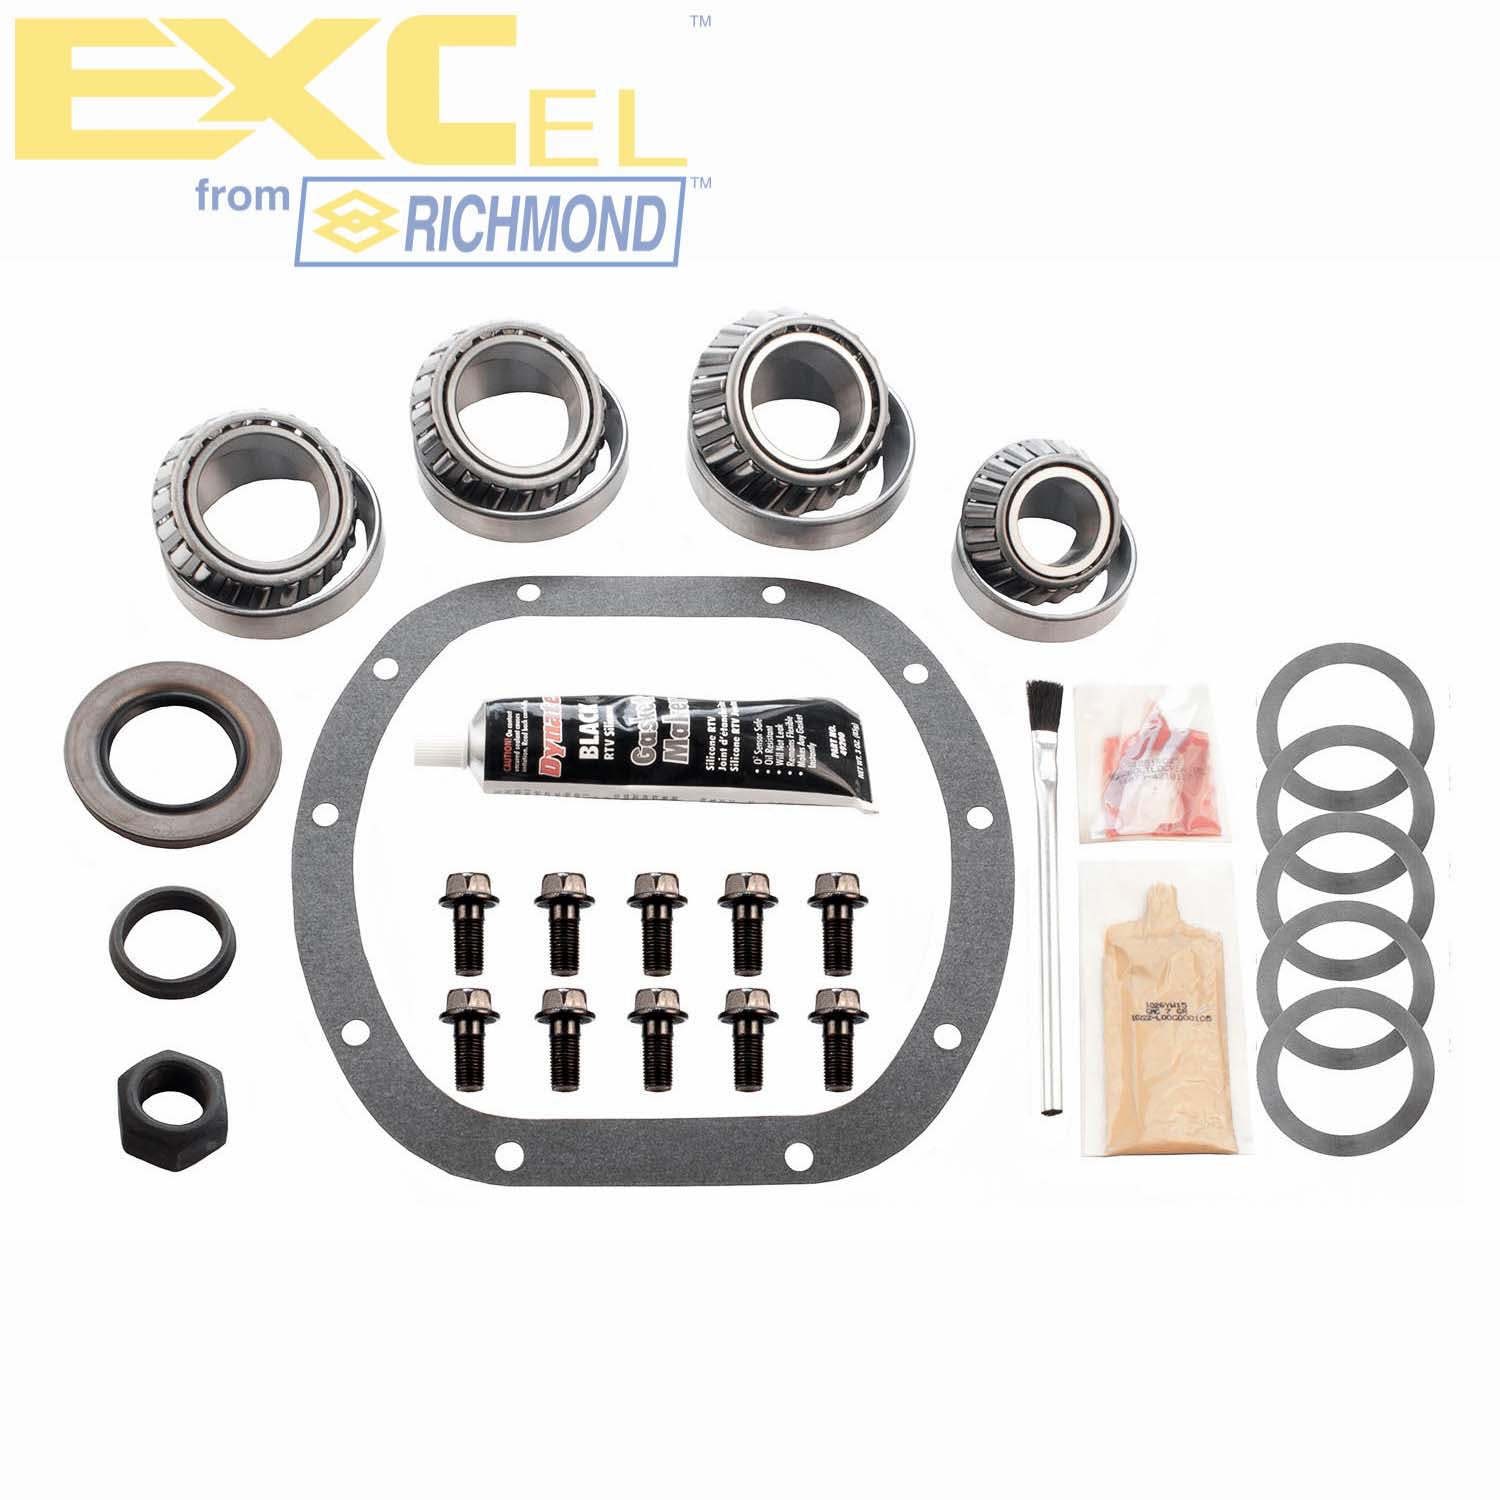 Excel XL-1070-1 Differential Bearing Kit